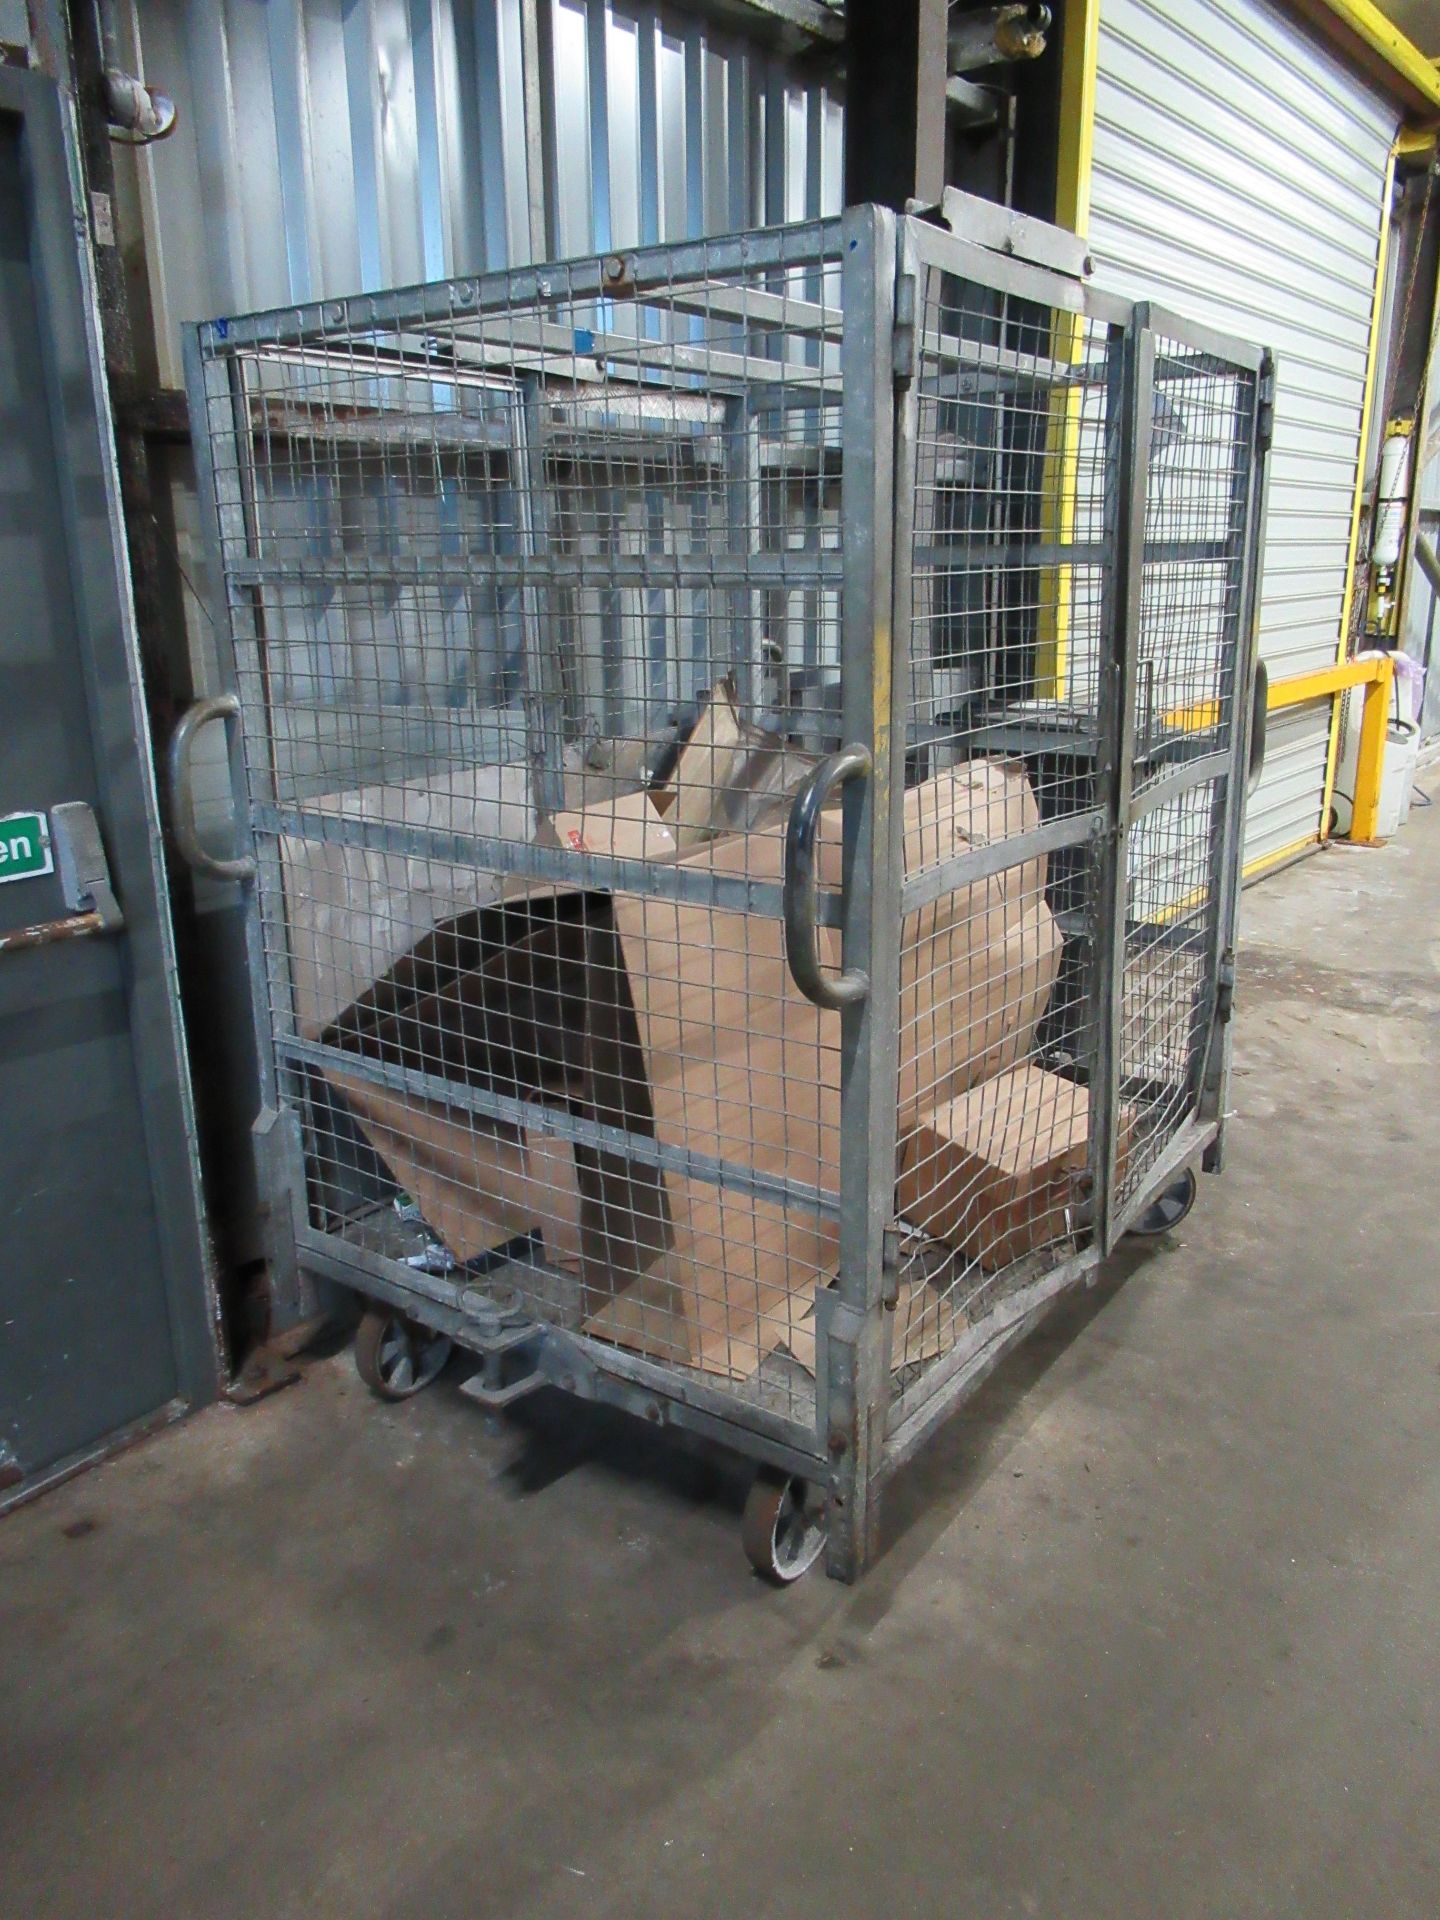 2 Barret mobile open top cages, galvanised steel 1200mm wide x 1500mm long x 1500mm high with draw - Image 3 of 12